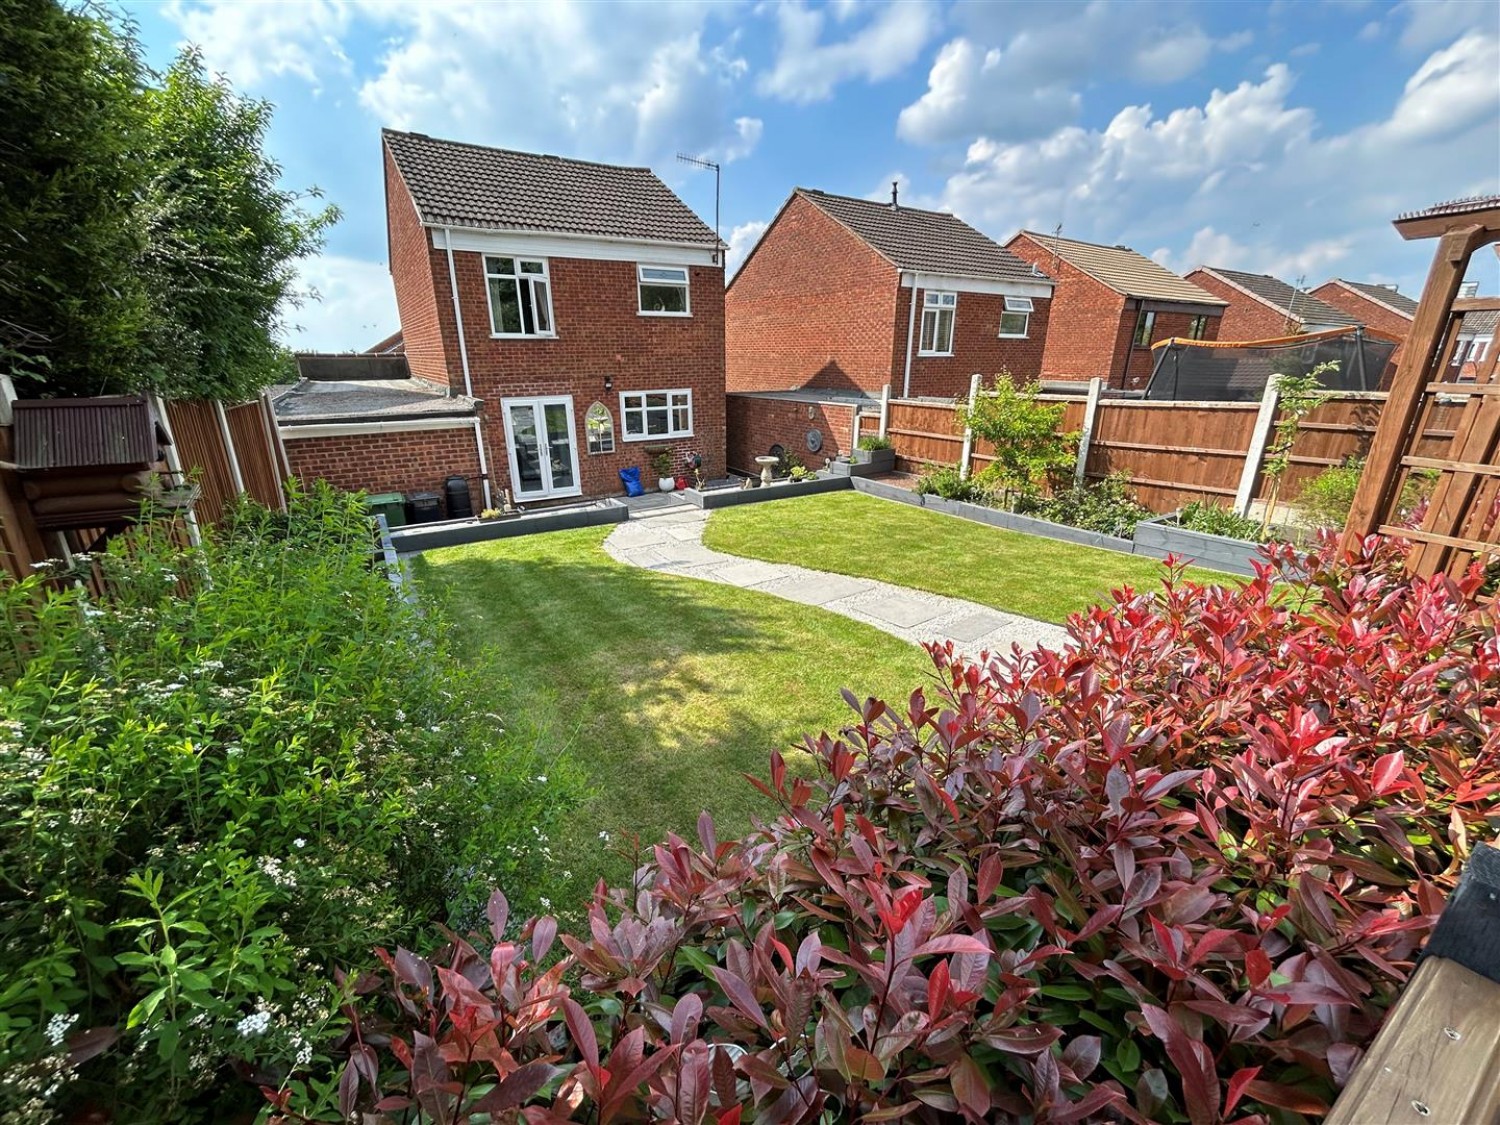 Aldeford Drive, Withymoor, Brierley Hill, DY5 4RB